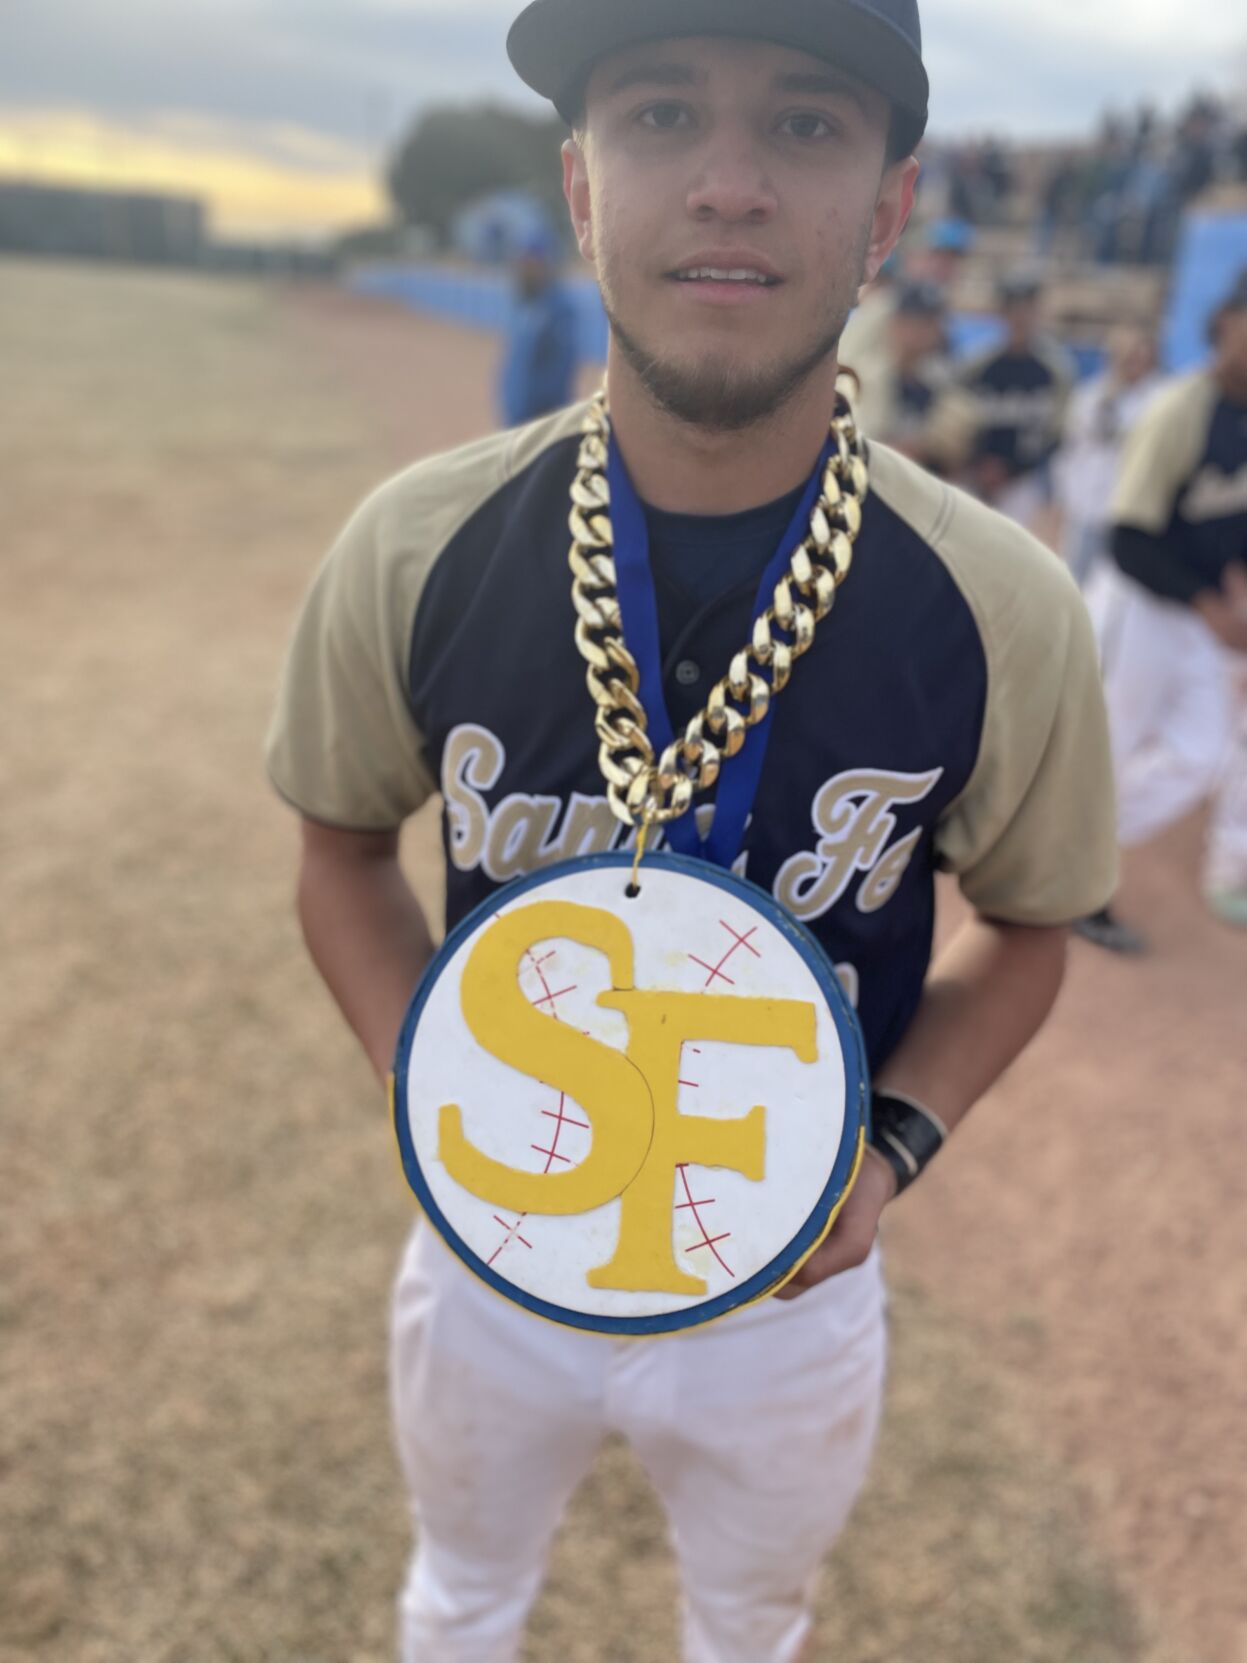 New chain brings even more swag to Padres  The San Diego UnionTribune